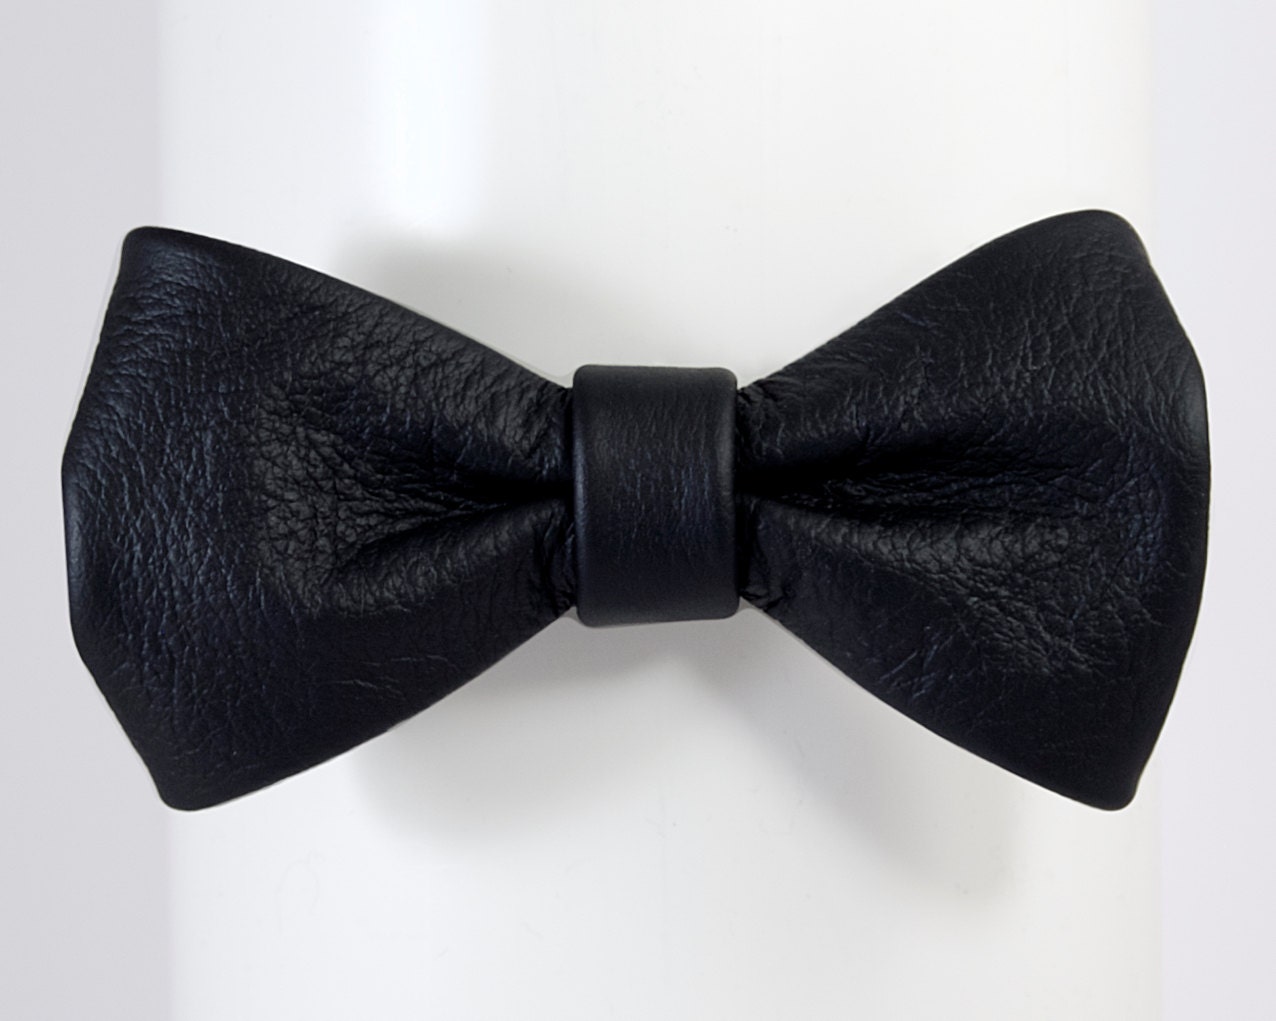 Formal Leather Bow Tie by RandLeather on Etsy